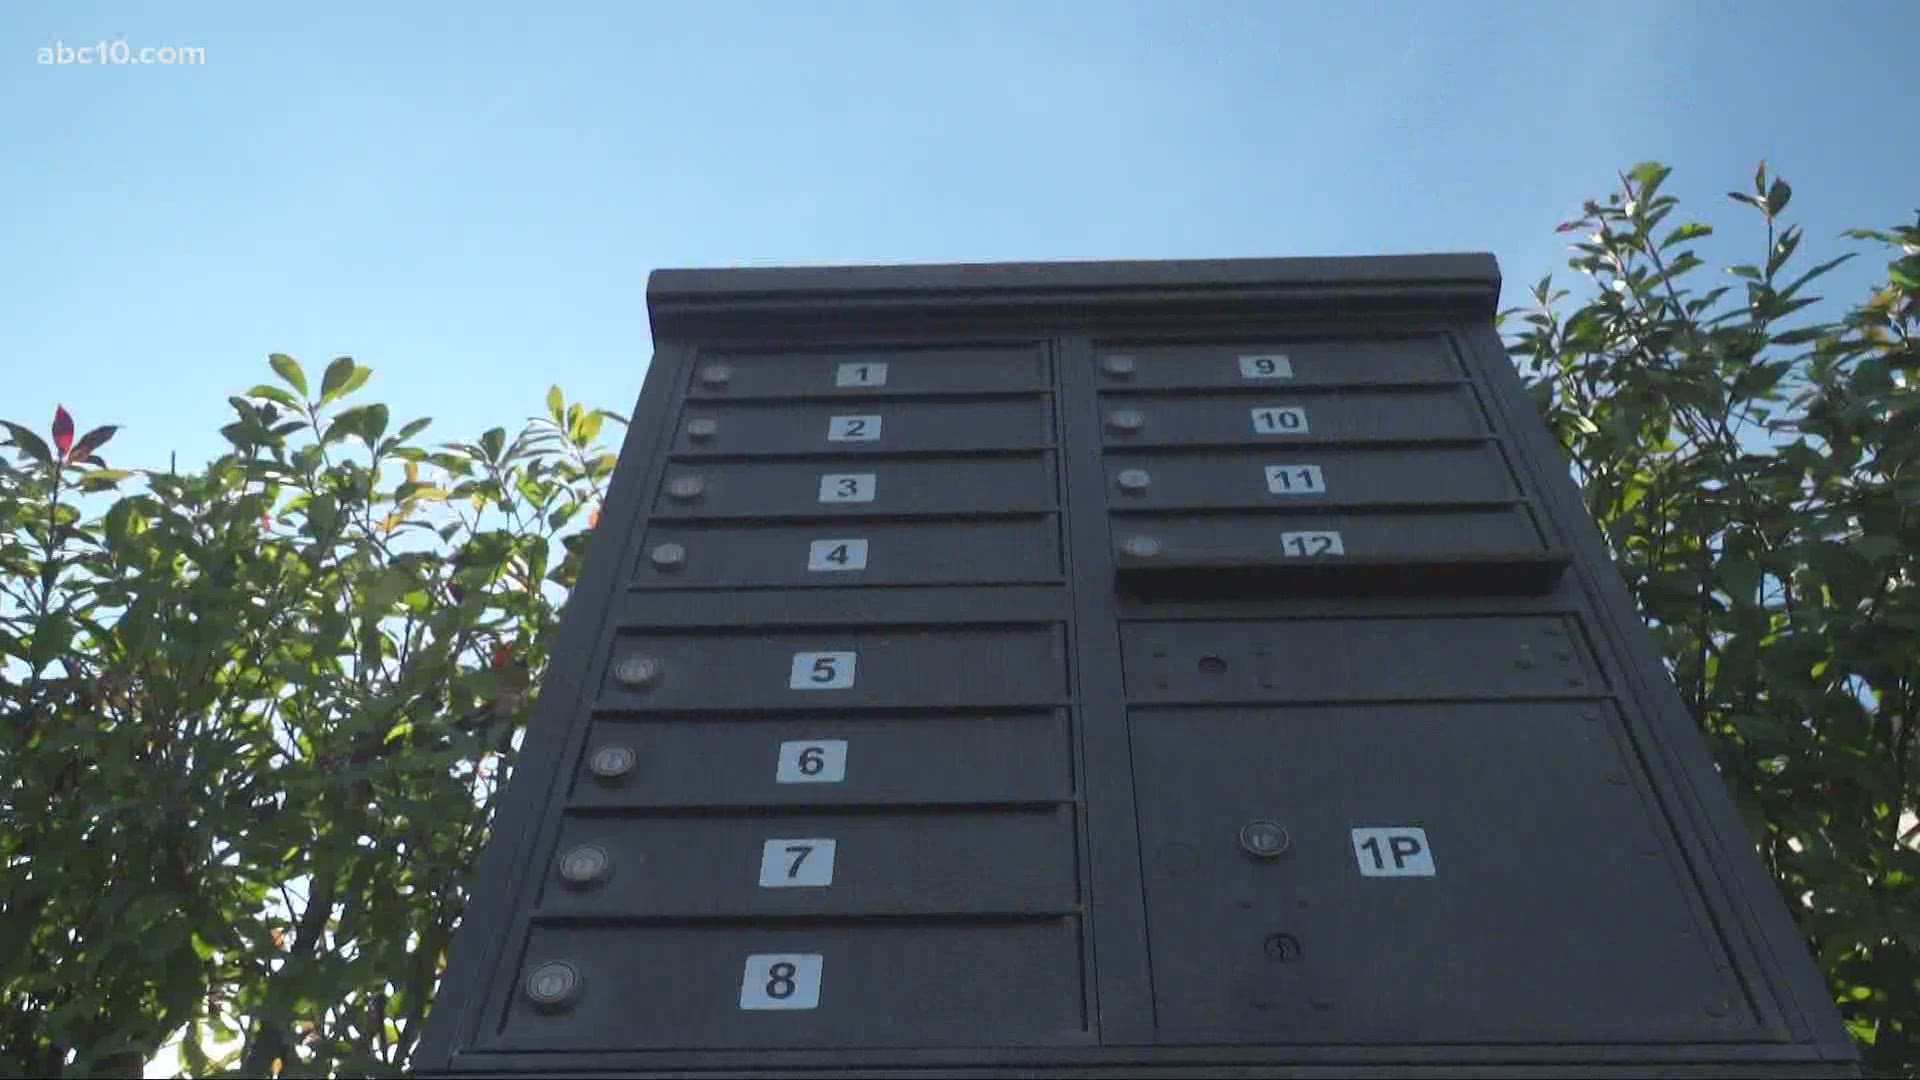 Roseville police say they are seeing an increase in mail thefts. They say they have seen nearly 20 instances in three months, but believe the number is much greater.